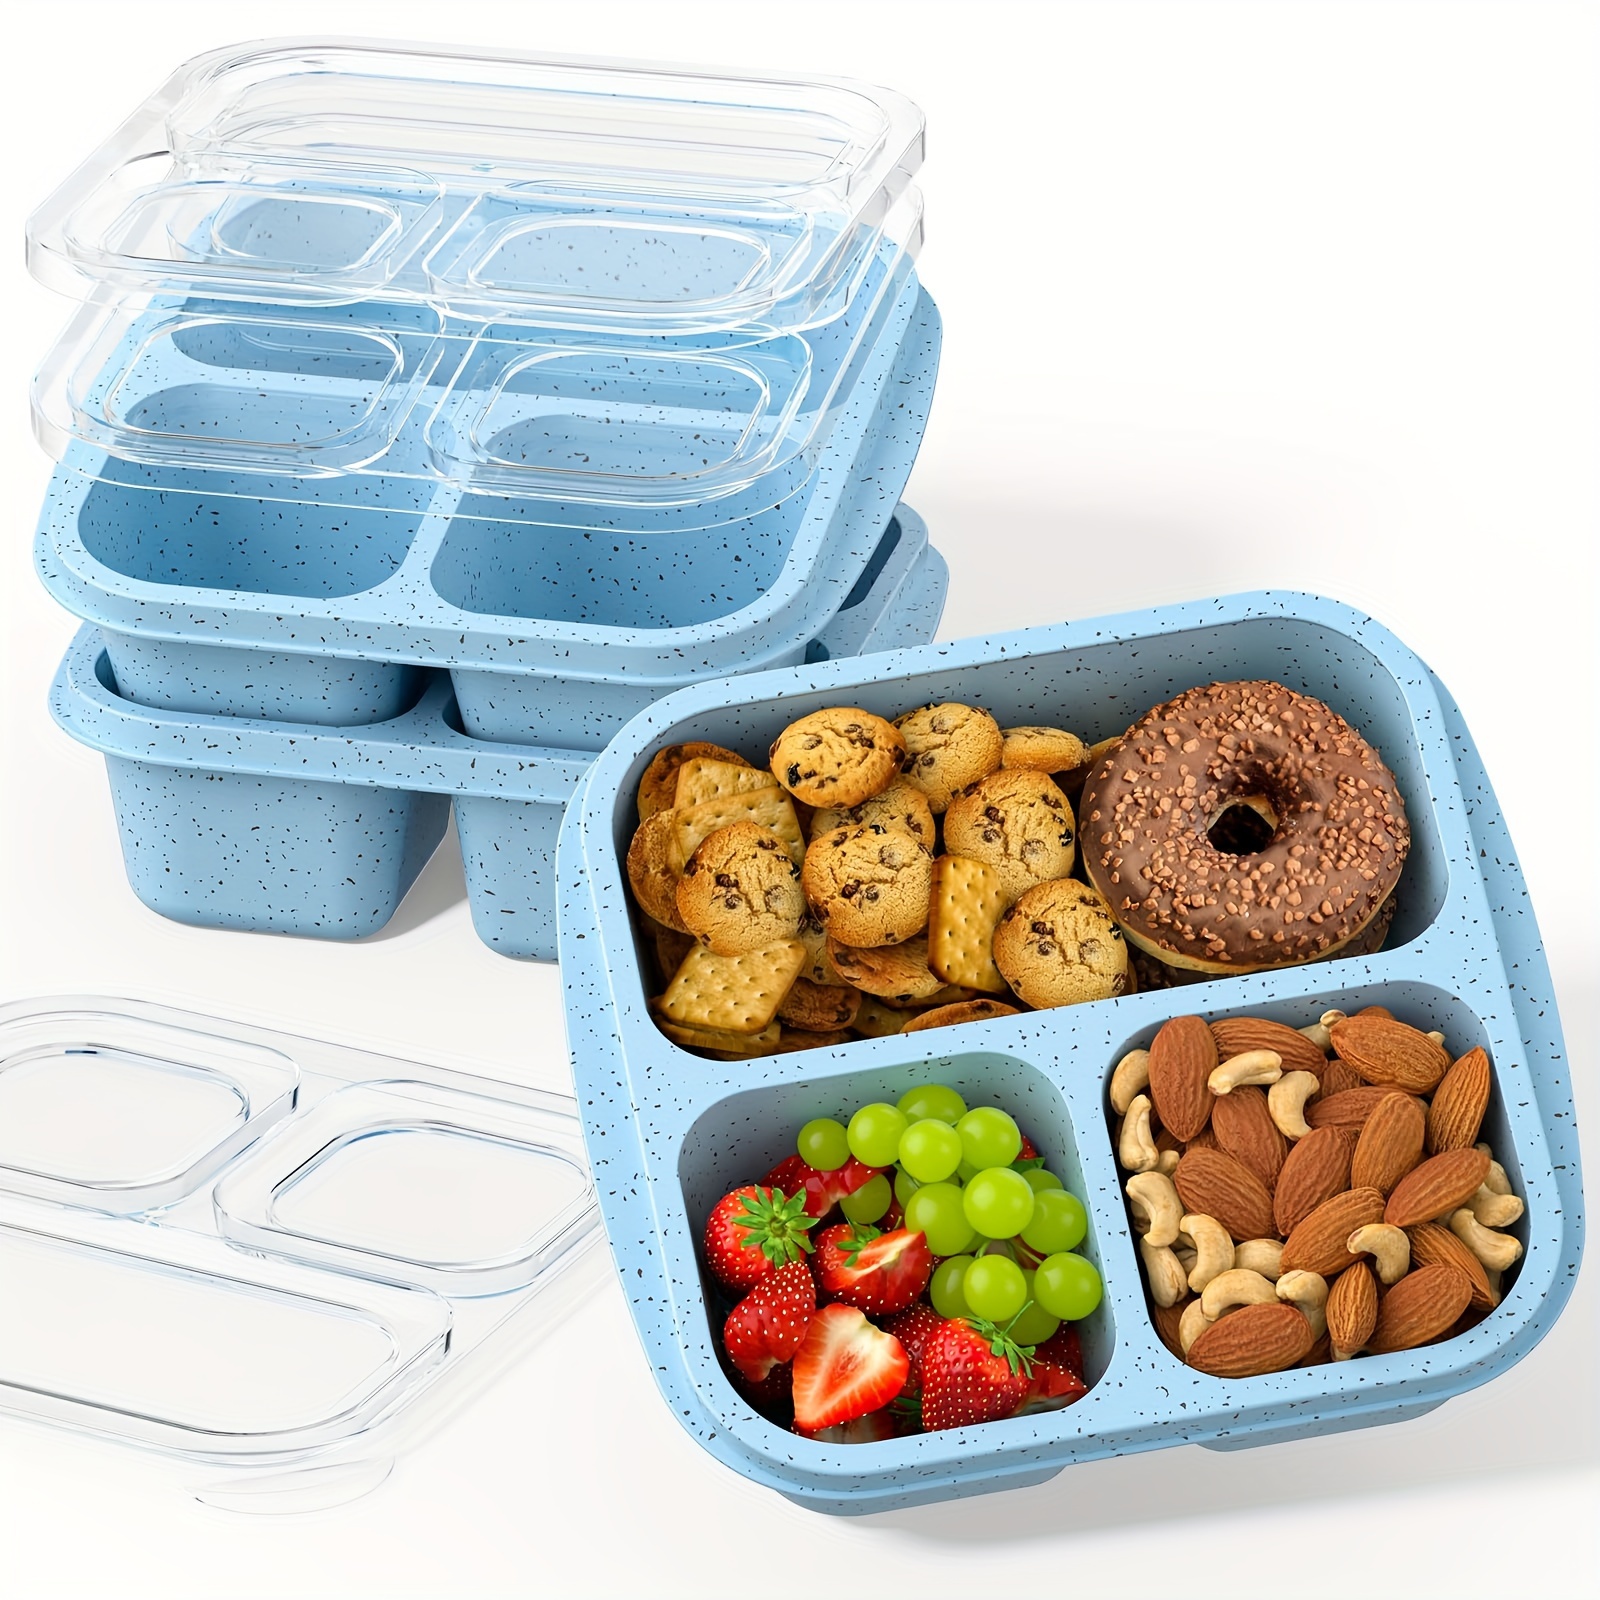 

3-pack Bento Lunch Boxes With 3 Compartments, Stackable, Reusable Meal Prep Containers, Bpa-free Plastic, Dishwasher Safe Snack Boxes For Adults